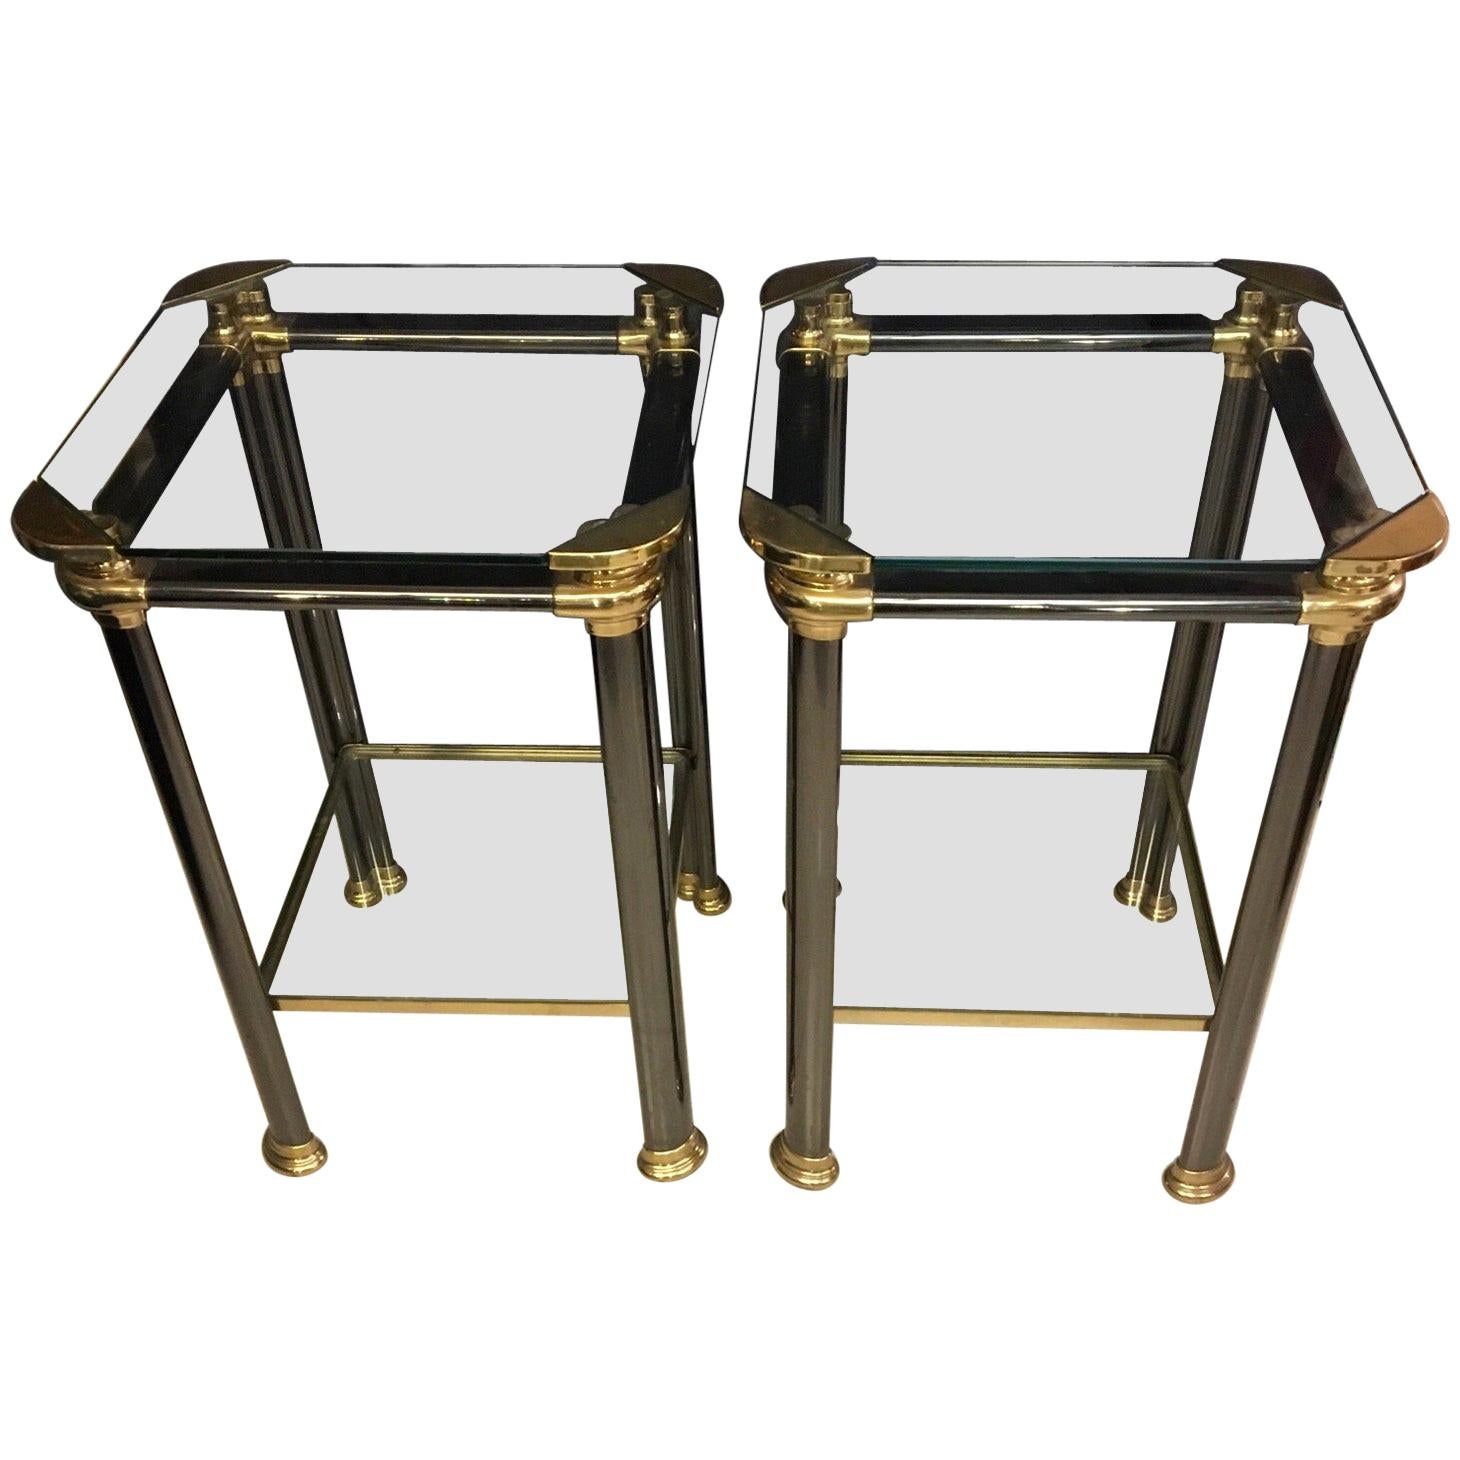 Pair of Italian Side Tables with Anthracite Metal and Brass Structure, 1970s